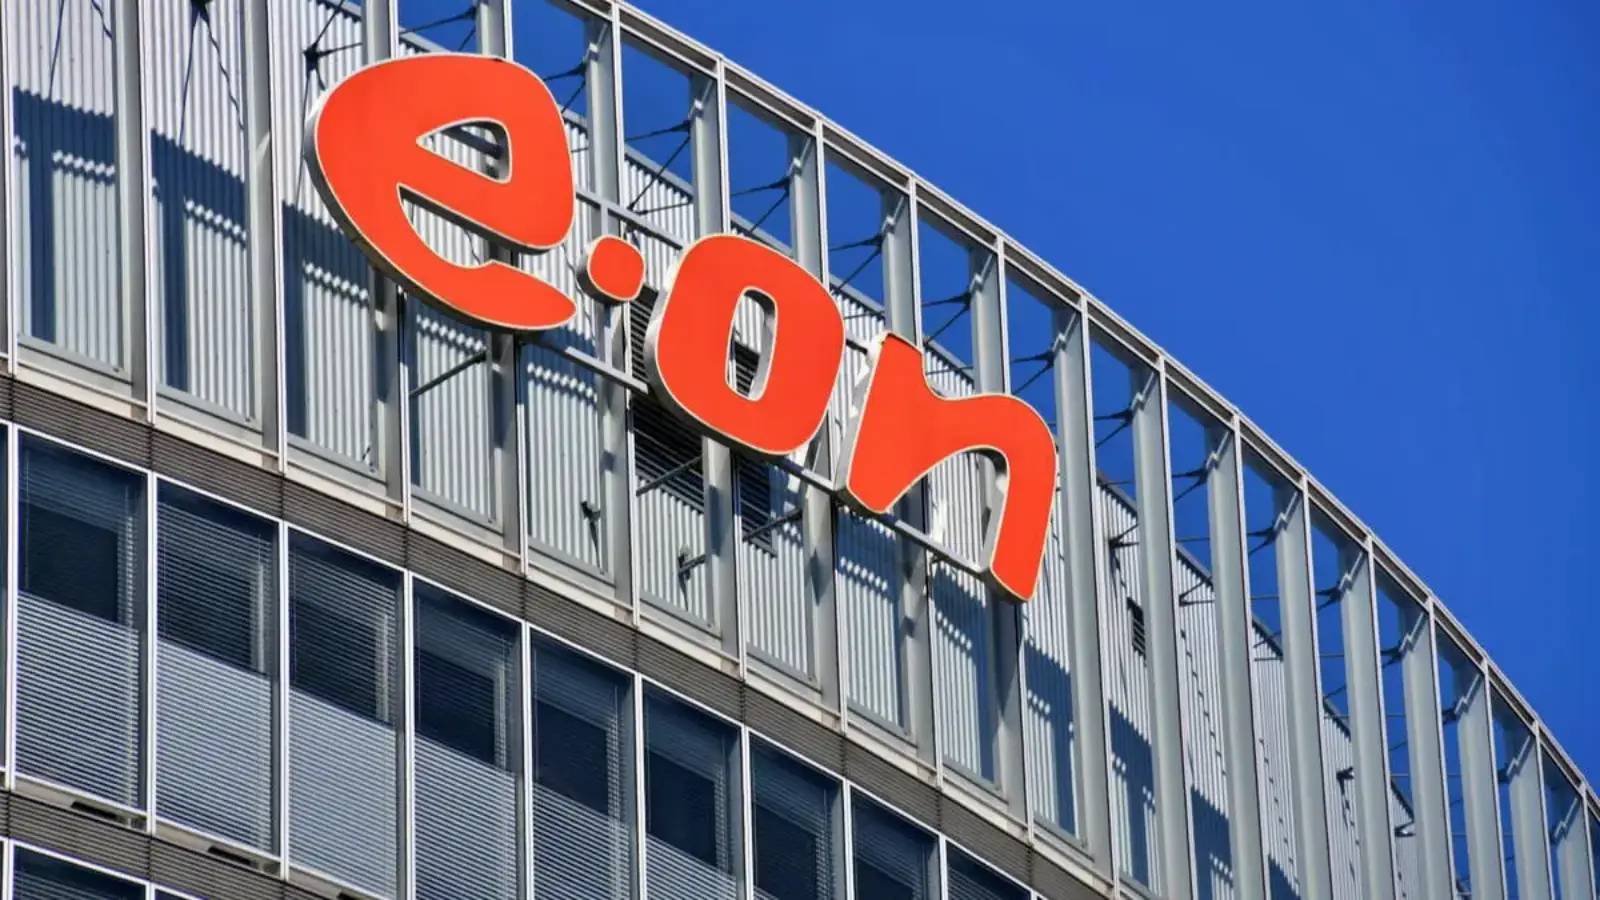 EON Official Plan IMPORTANT Decisions Announced to MILLIONS of Romanians